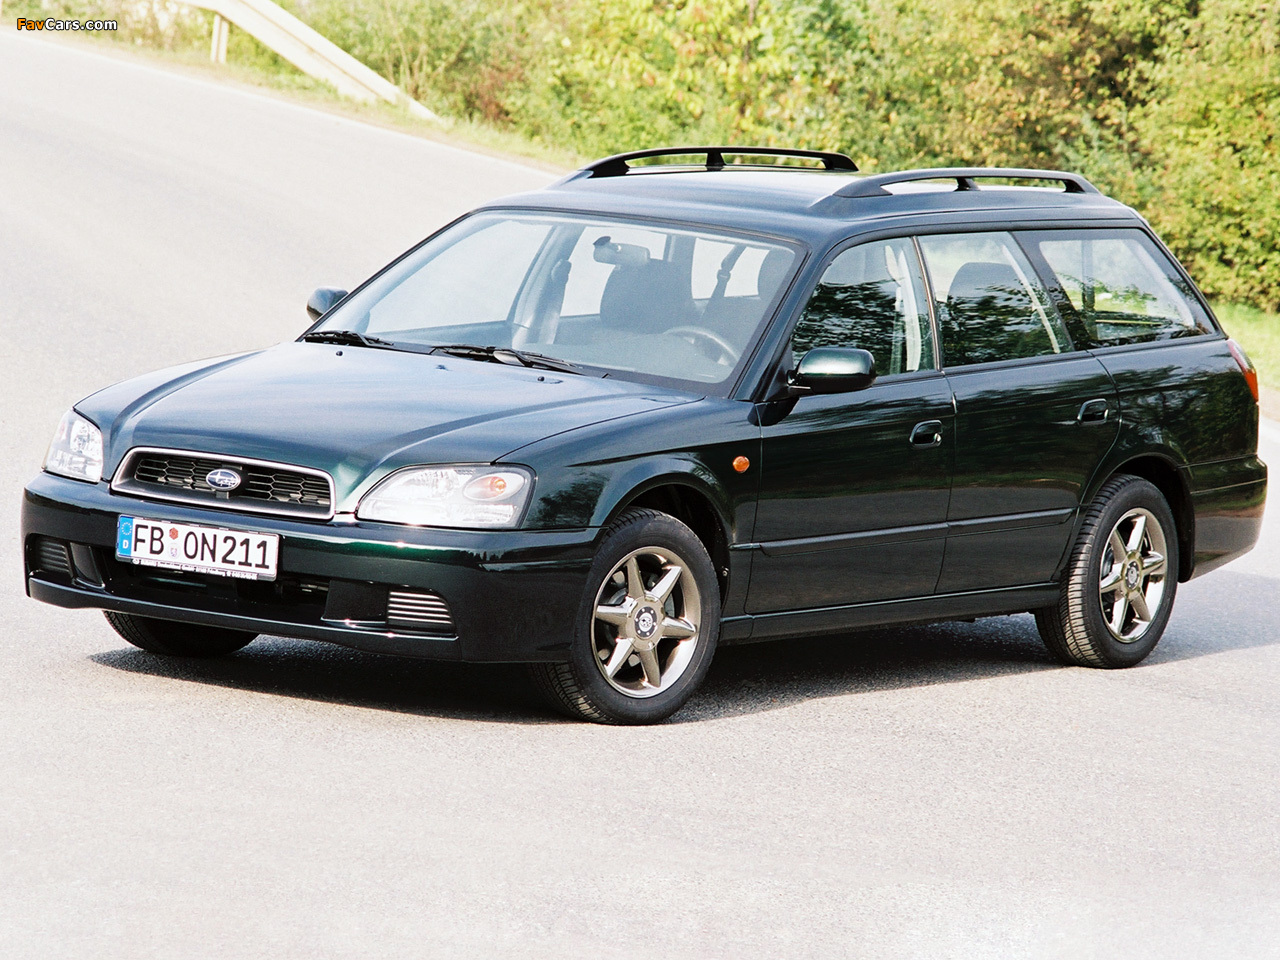 Subaru Legacy 2.0 GL Touring Wagon (BE,BH) 1998–2003 pictures (1280 x 960)